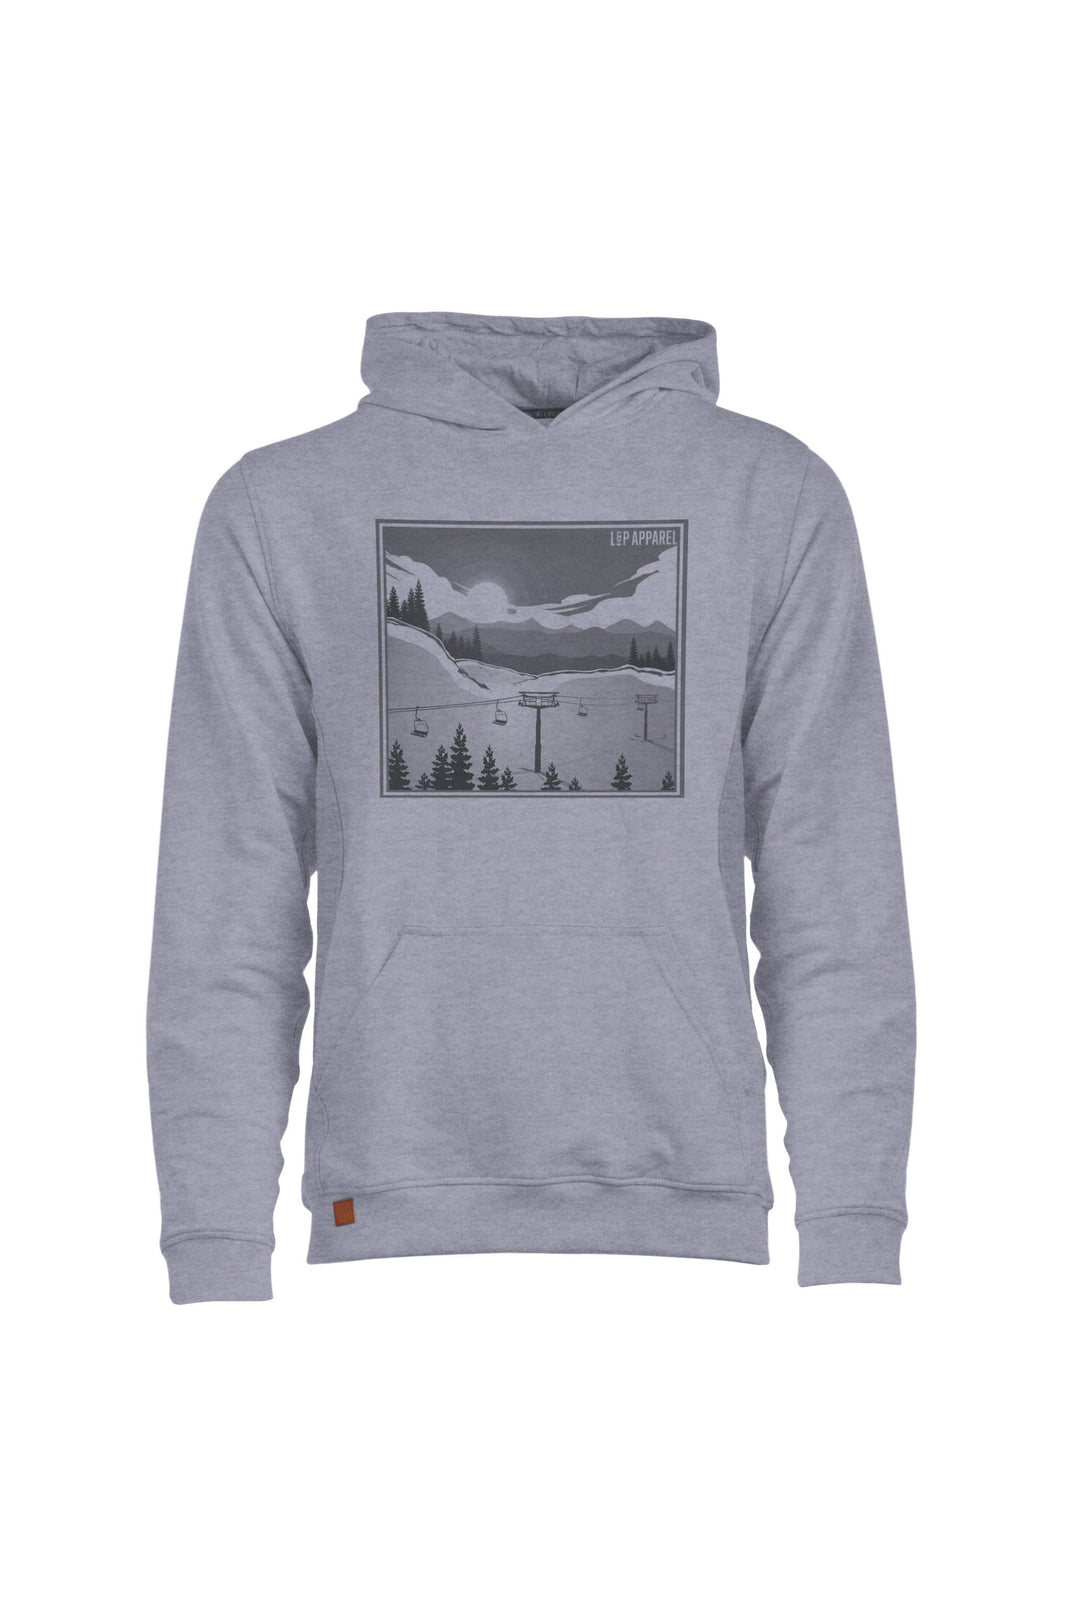 Thin cotton hoodie [Chairlift series]